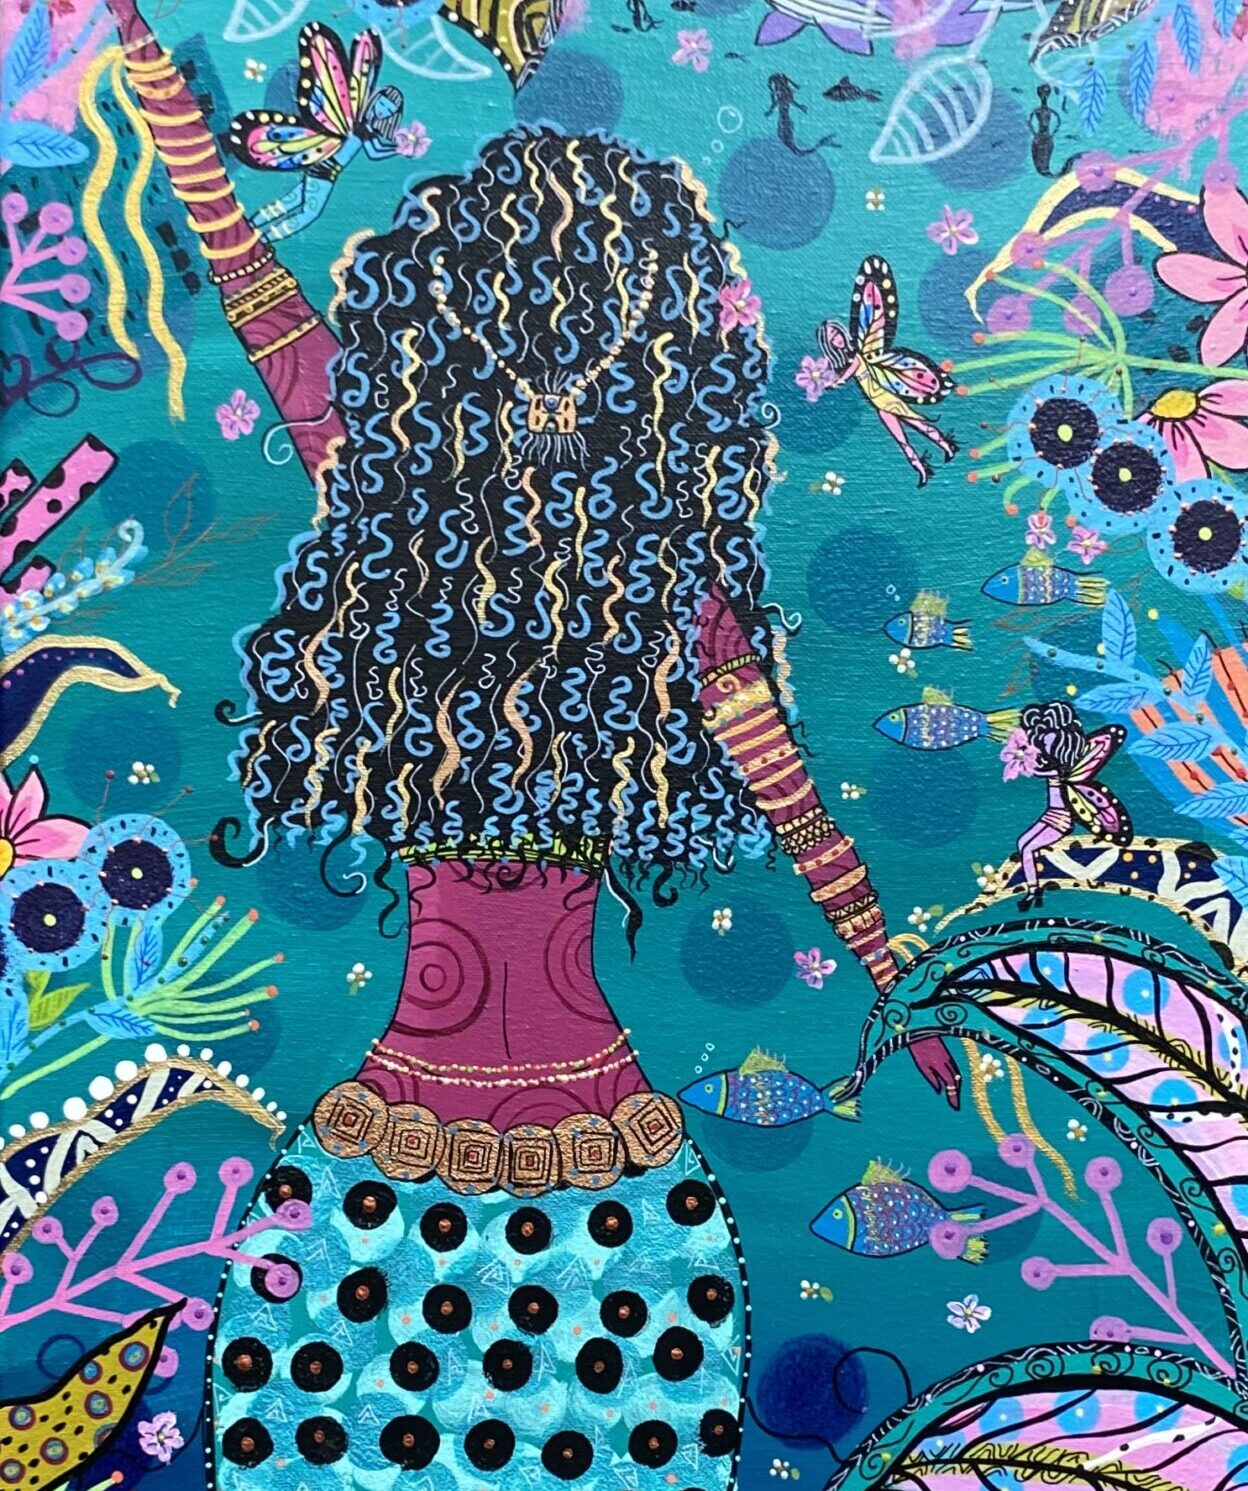 Painting of an African-American mermaid surrounded by a blue sea and pink, blue, and golden leaves and flowers